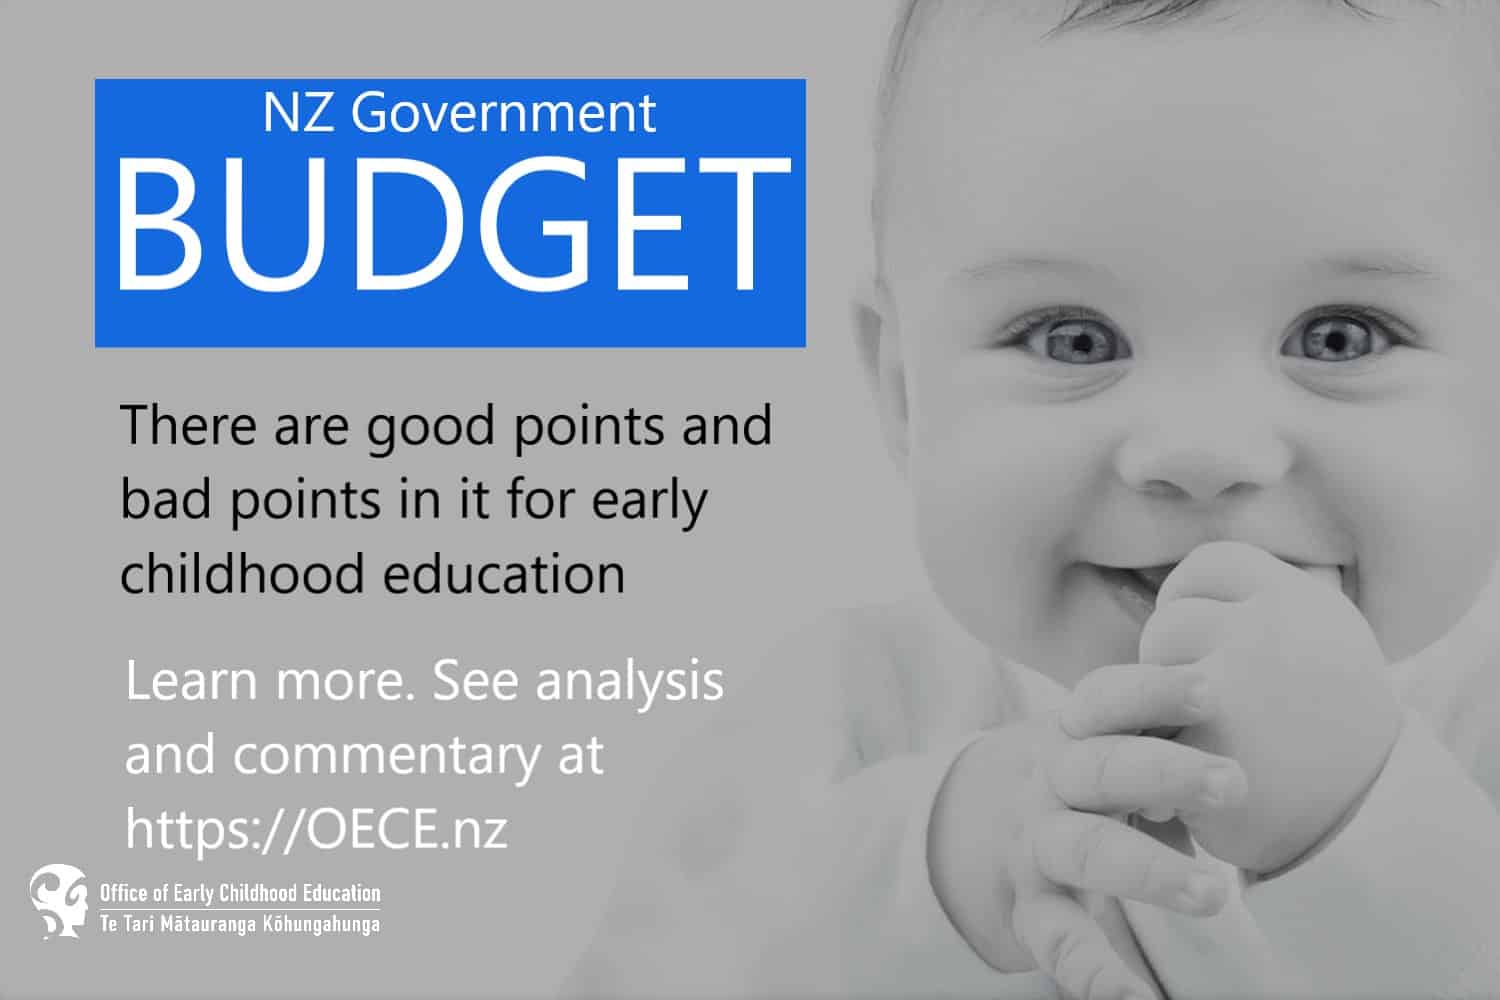 NZ Government Budget Announcements for Early Childhood Education